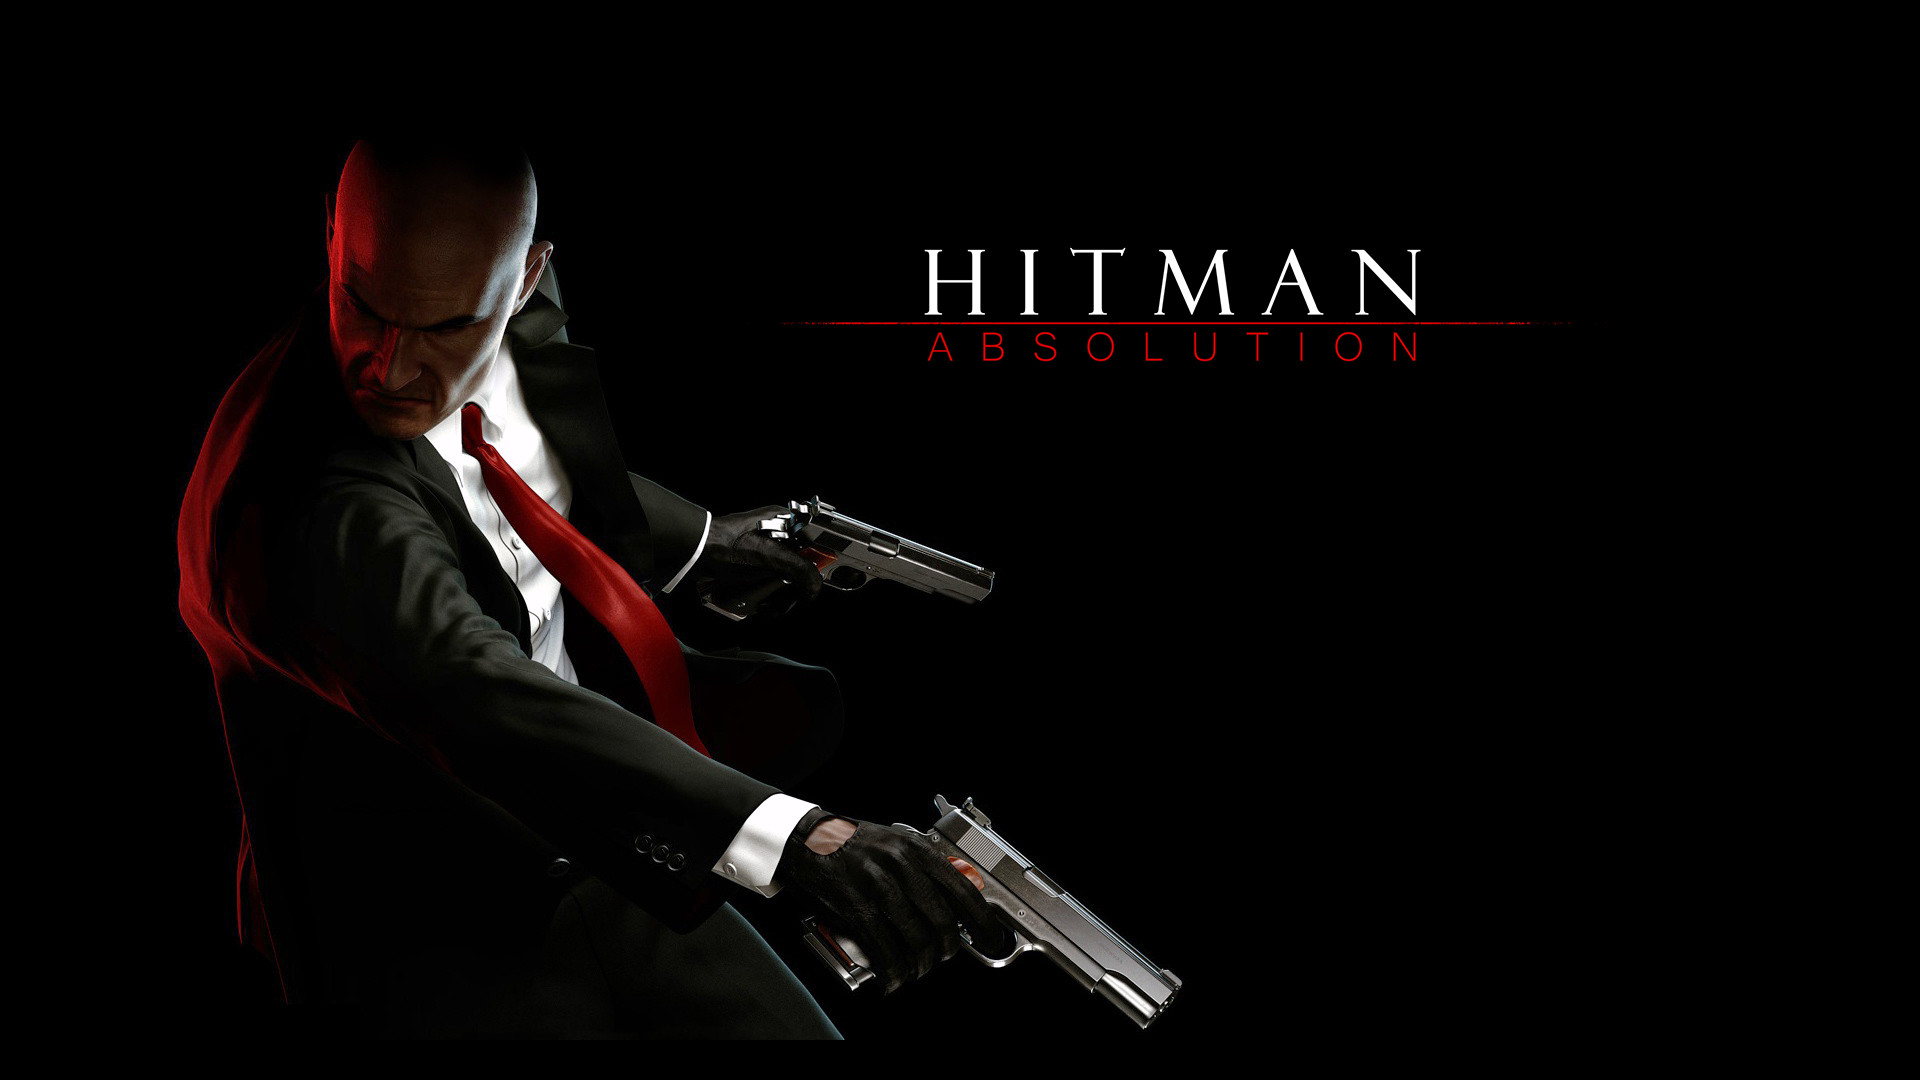 1920x1080 After a six year hiatus we are finally gifted with IO Interactive's fifth  addition to the Hitman franchise - Absolution.